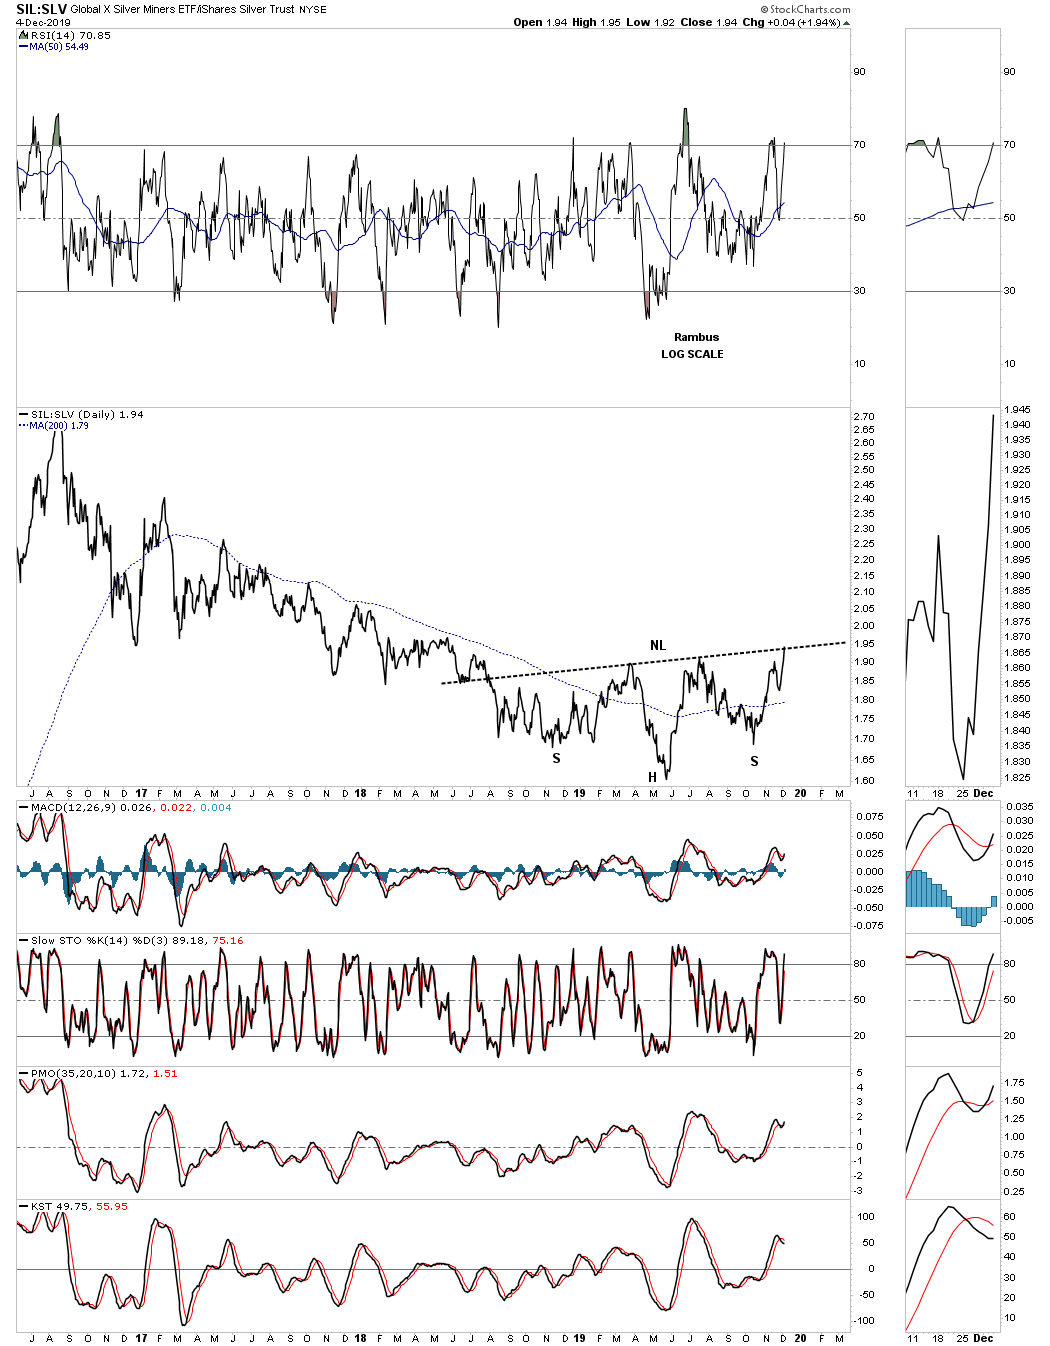 SIL/SLV Ratio Daily Chart